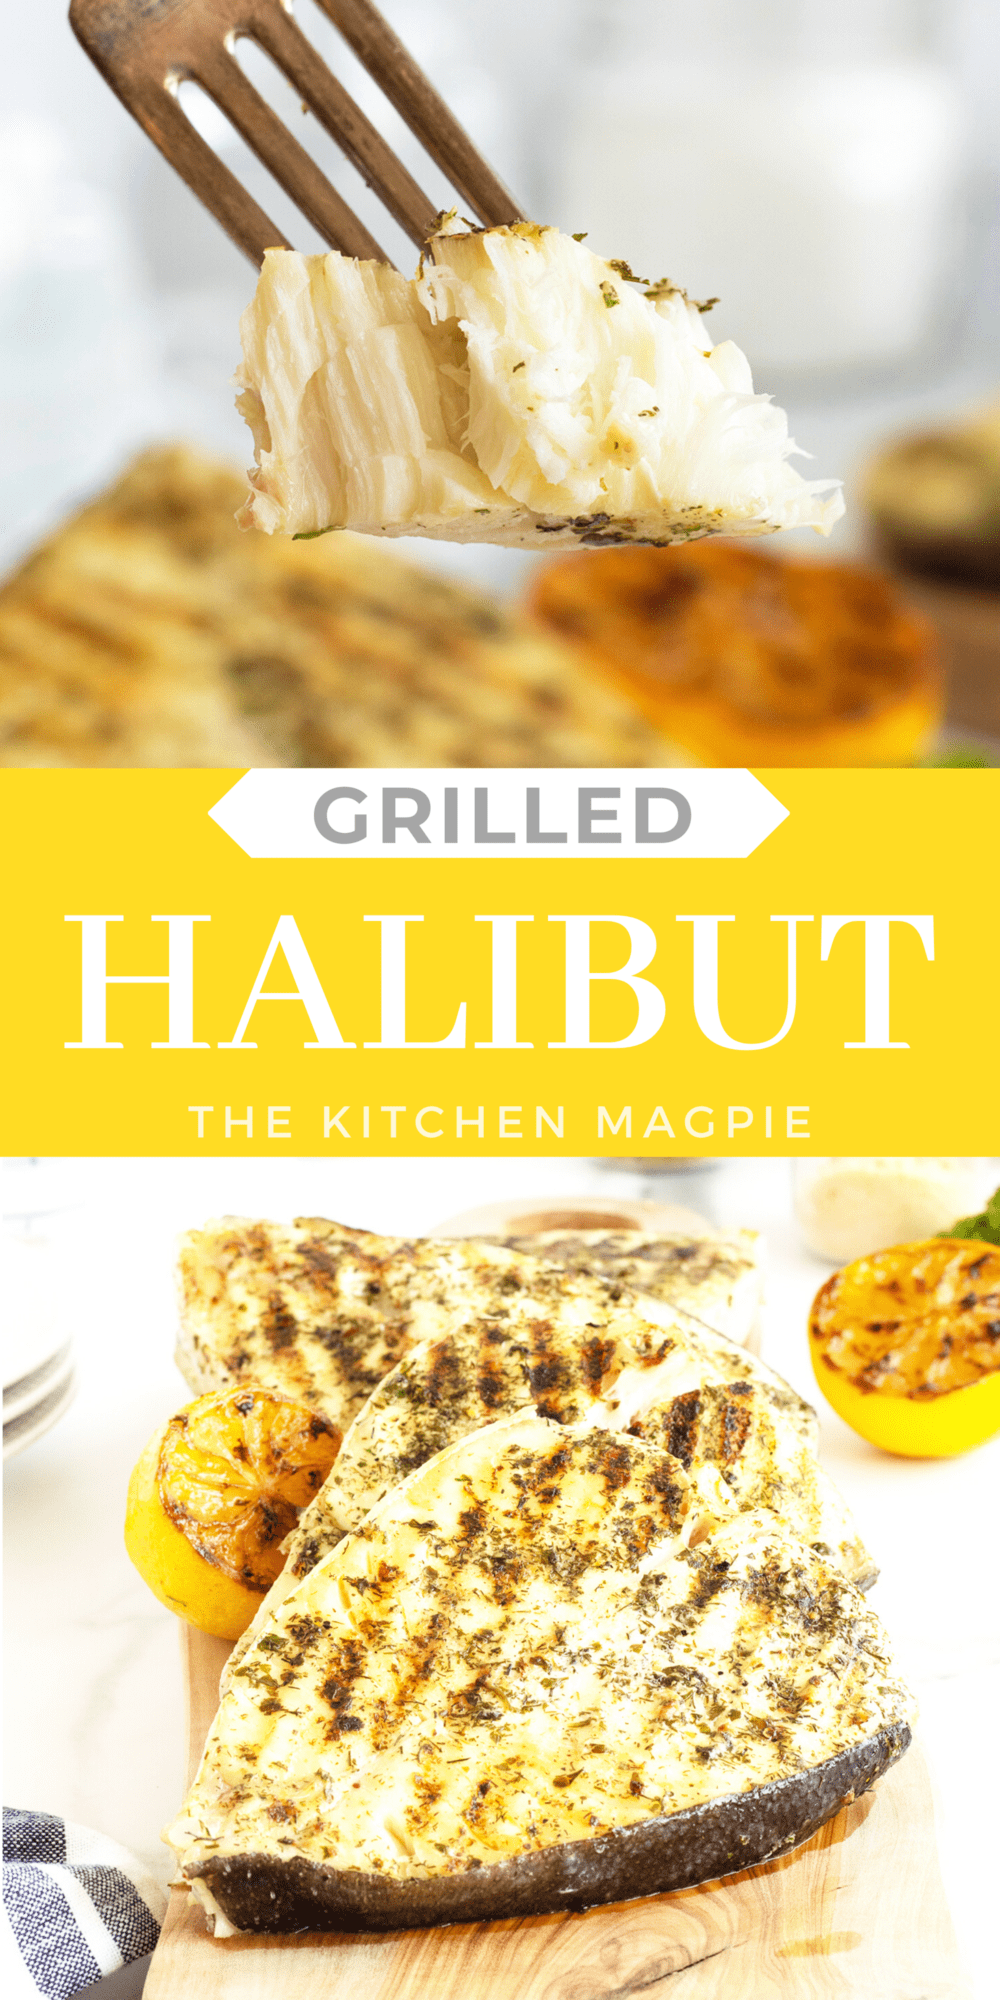 Fire up the grill and make some halibut steaks for dinner! The seasoning is easy and uses ingredients you already have at home!